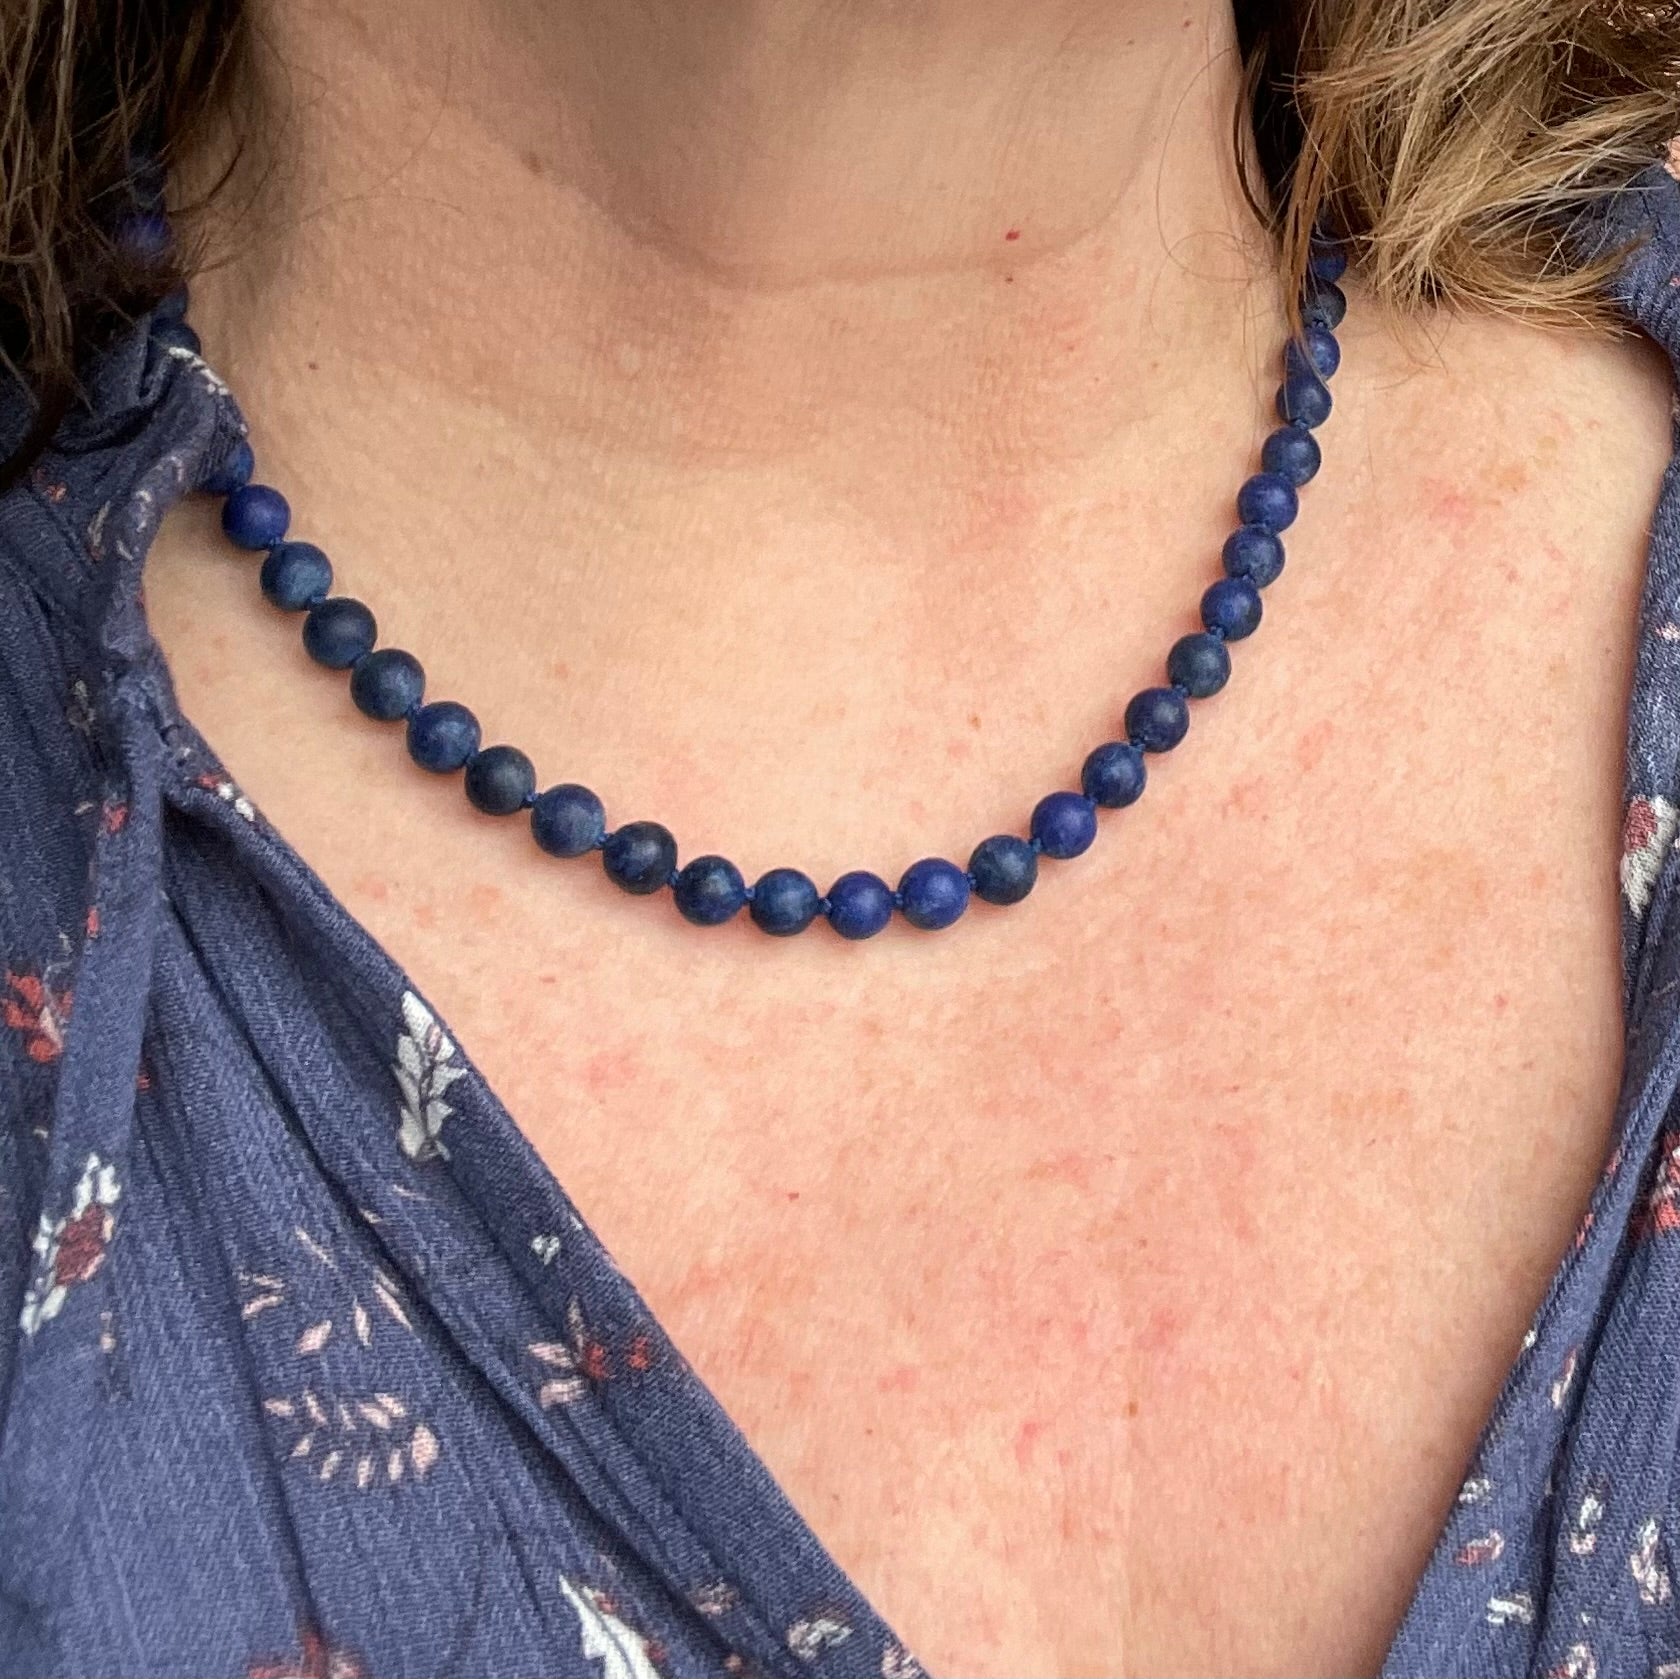 Semi precious beaded necklace. Lapis Lazuli stone necklace made in Canada by Wallis Designs.